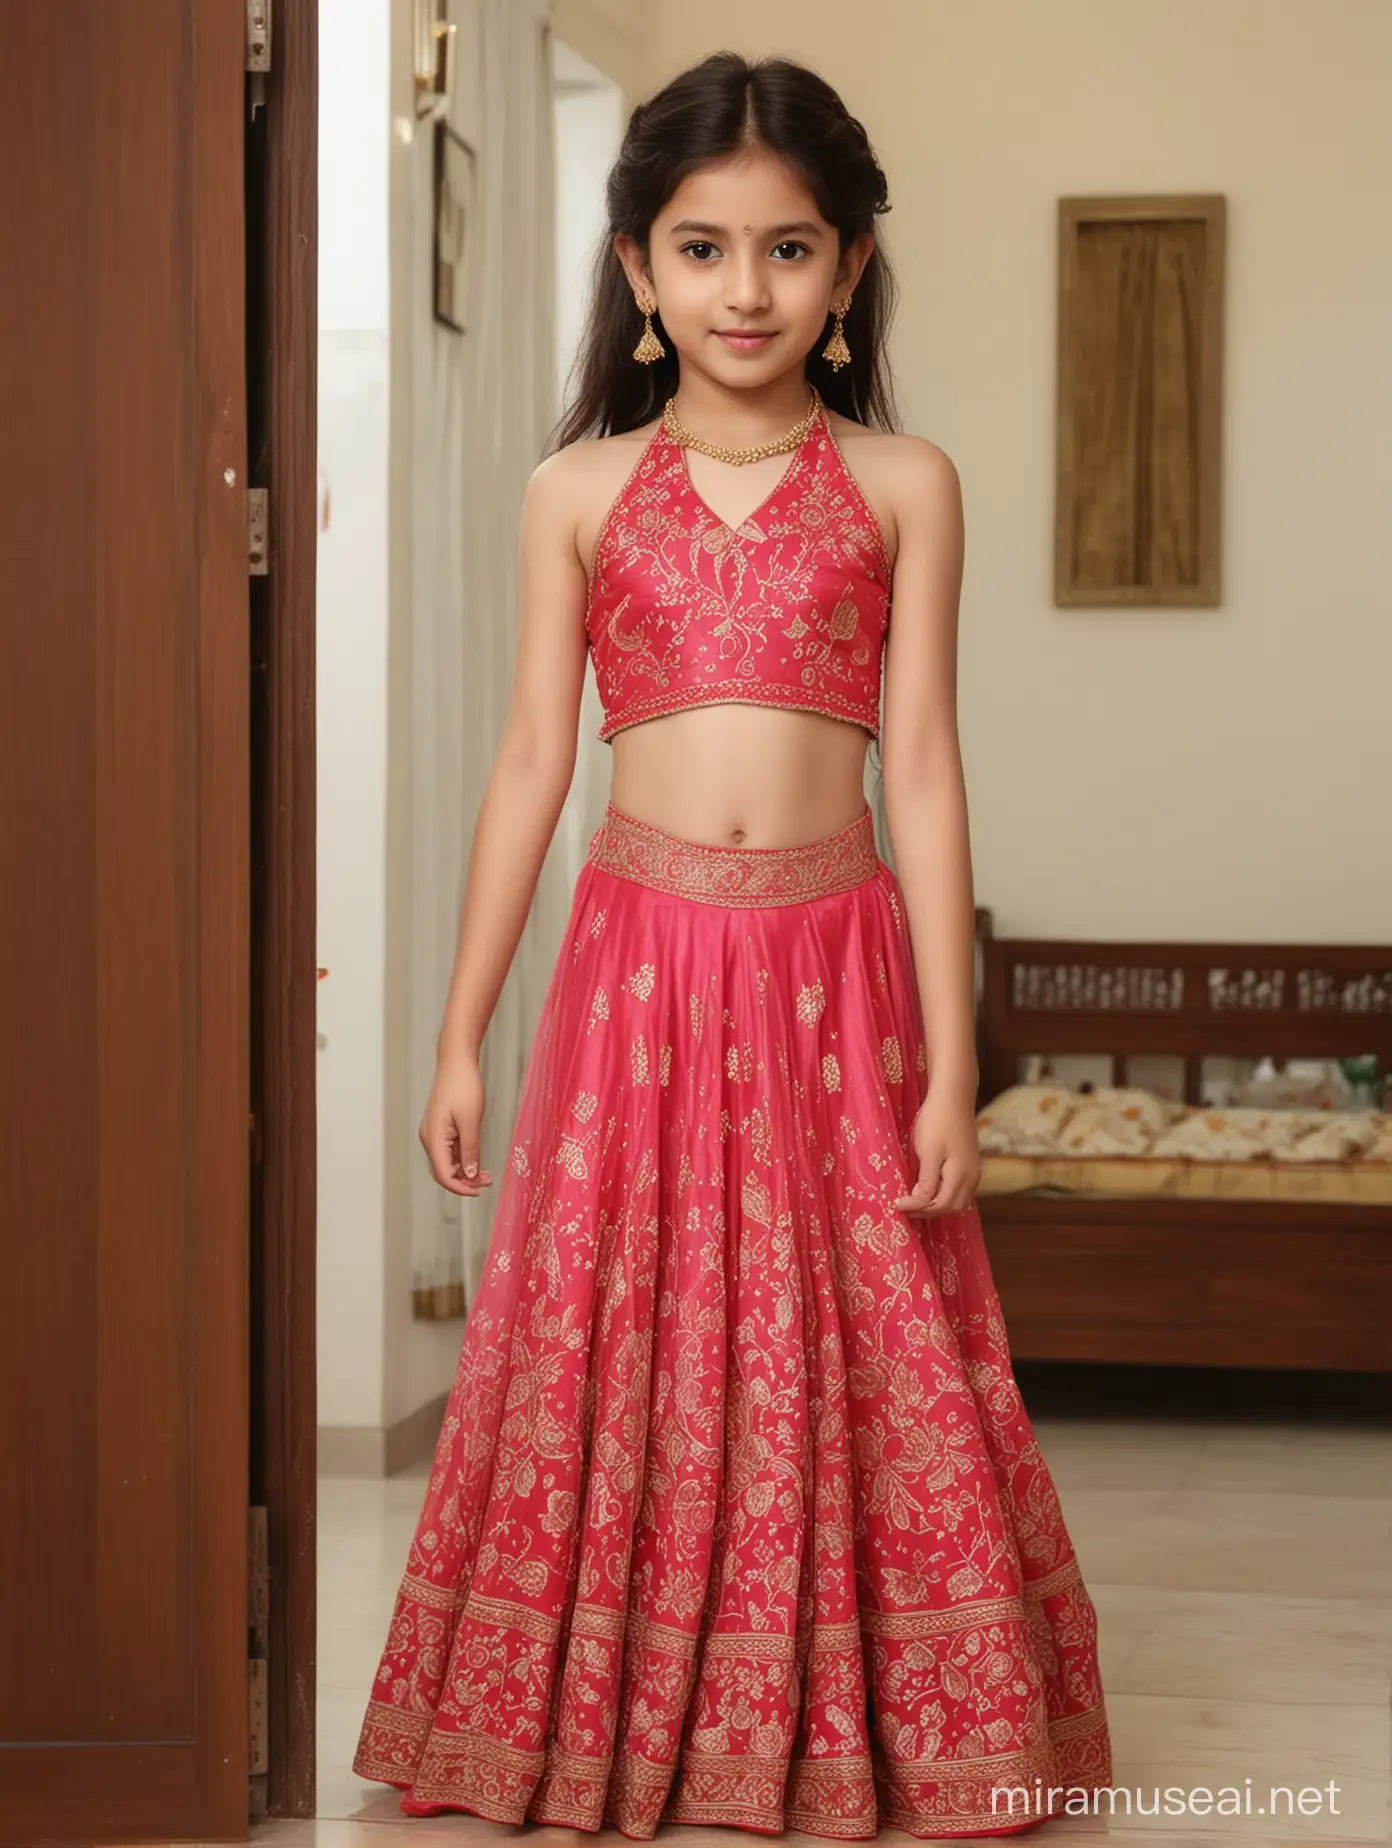 10 years old girl, very white skin, beautiful, wearing rose red very thin halter neck very thin choli with lehenga, her front view, in well lit house